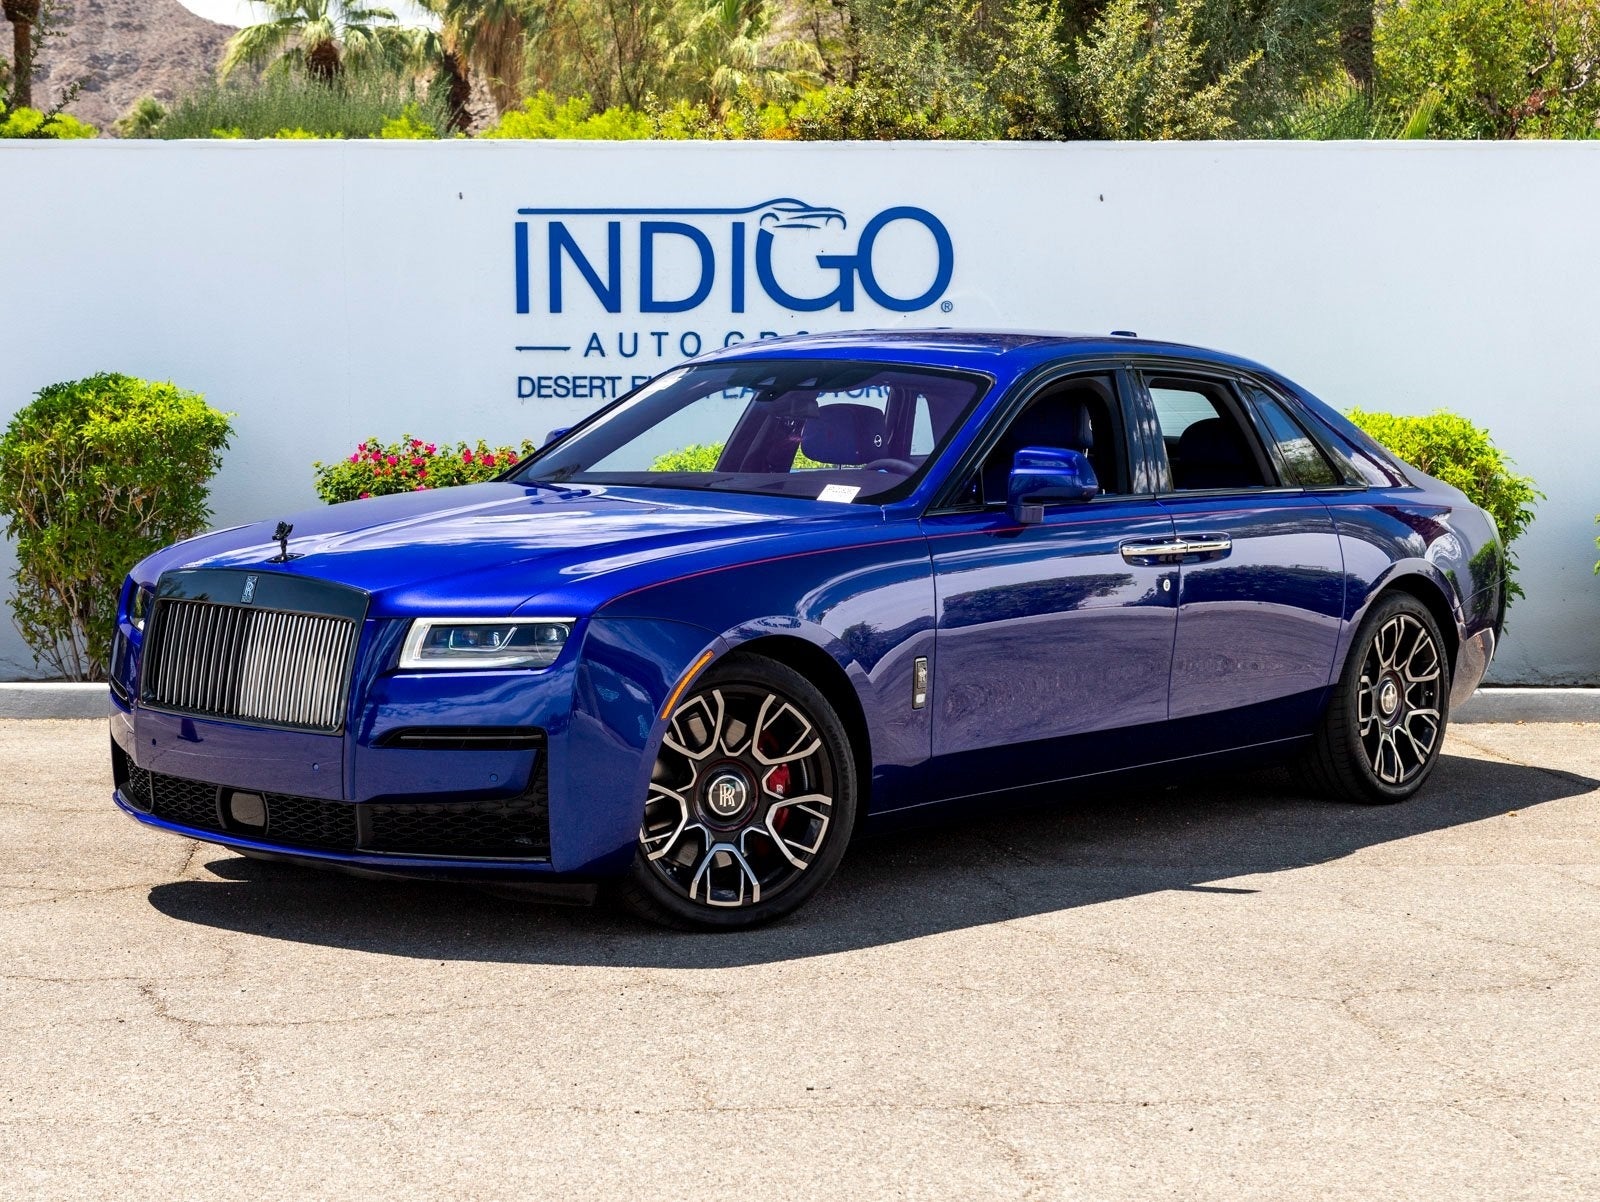 You Must Buy This The Worlds Greatest RollsRoyce